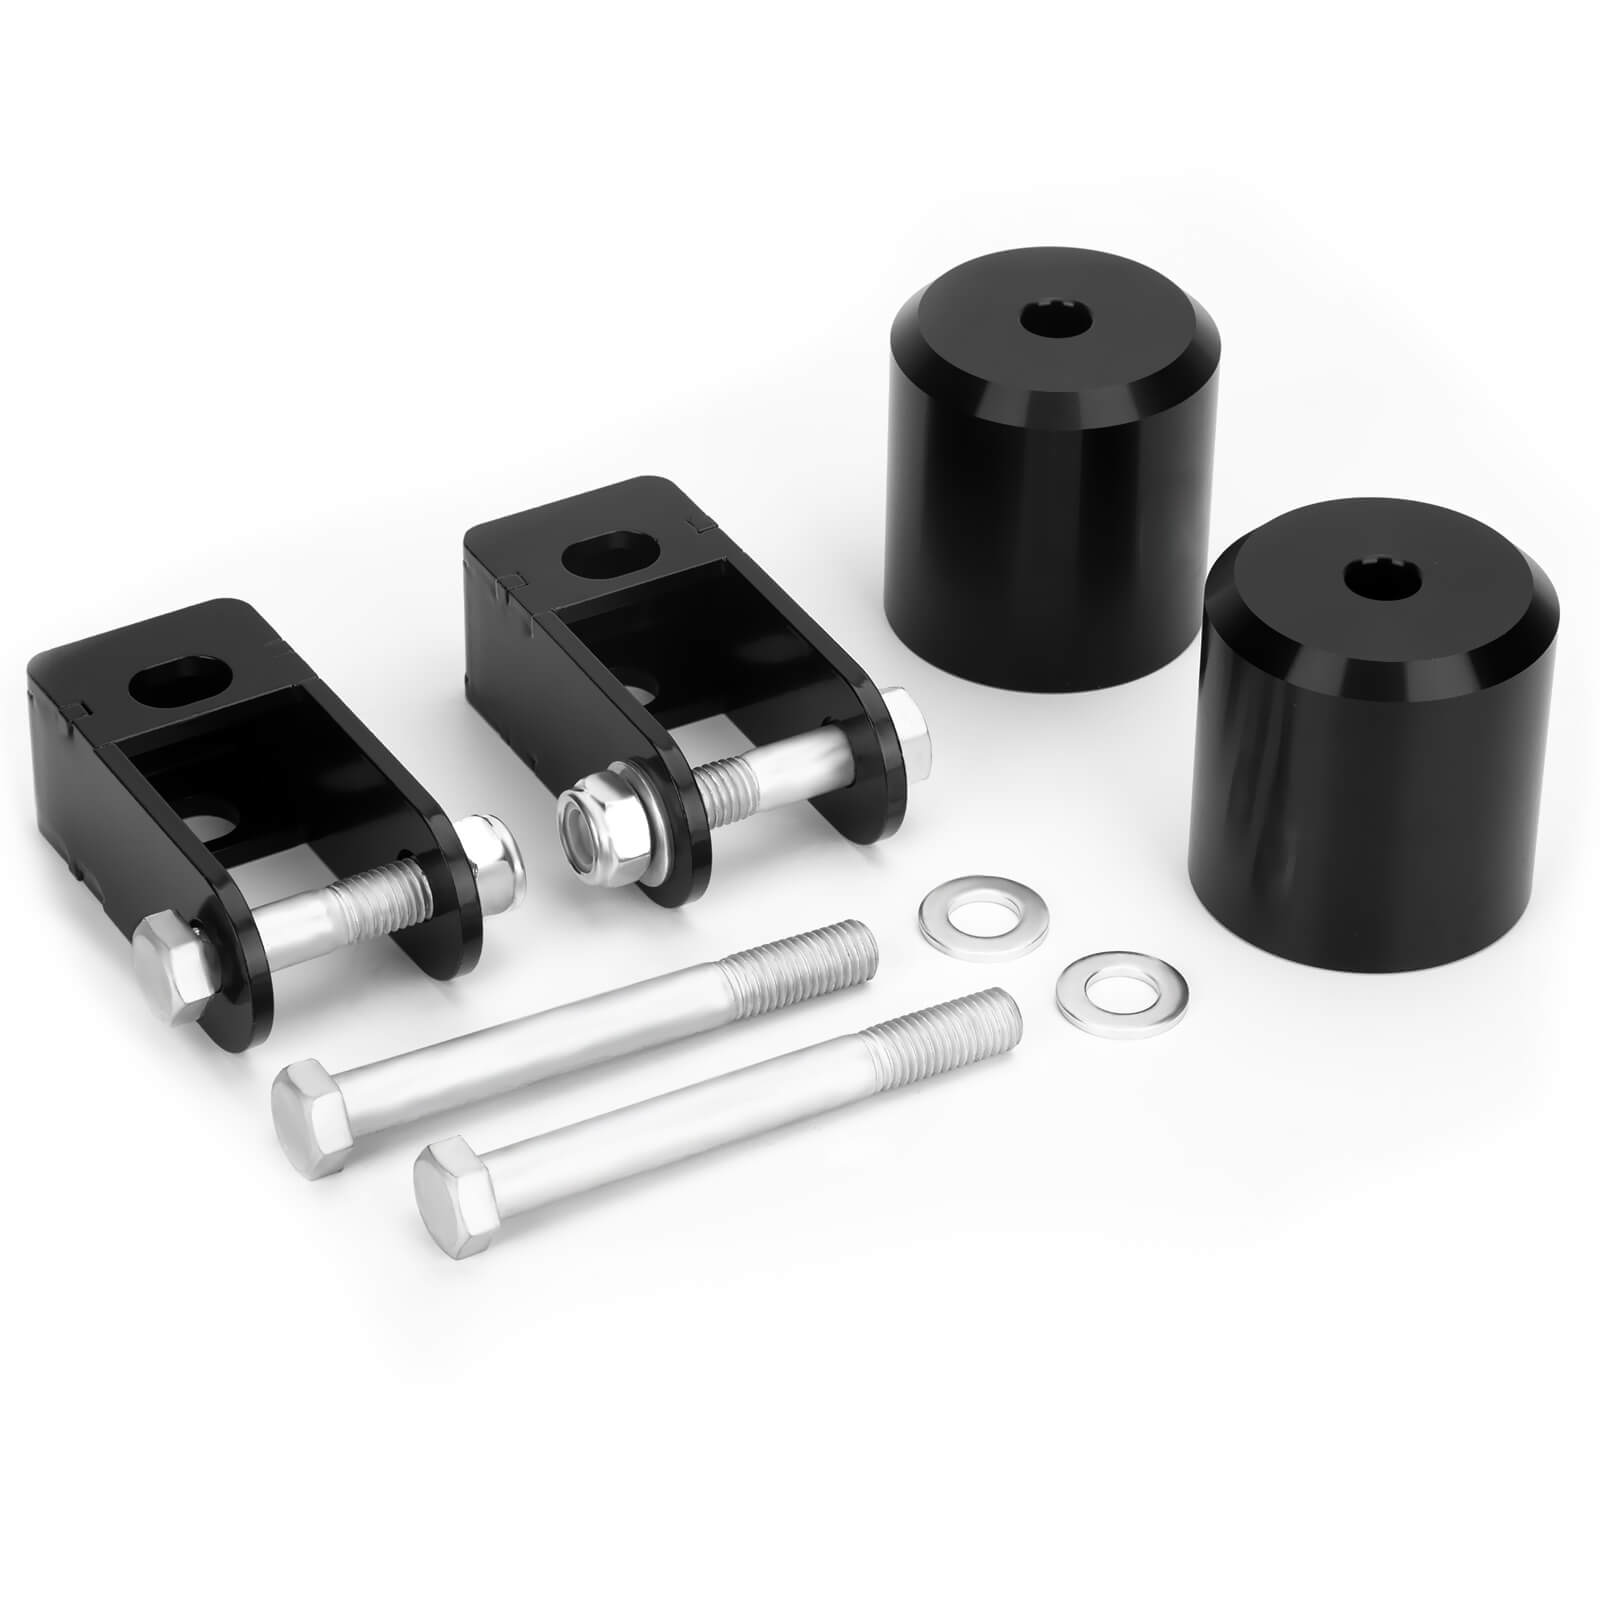 3" Front Lift Kits For 2006-2020 Ford F250/F350 2WD/4WD with Coil Spring Spacers and Shock Extenders